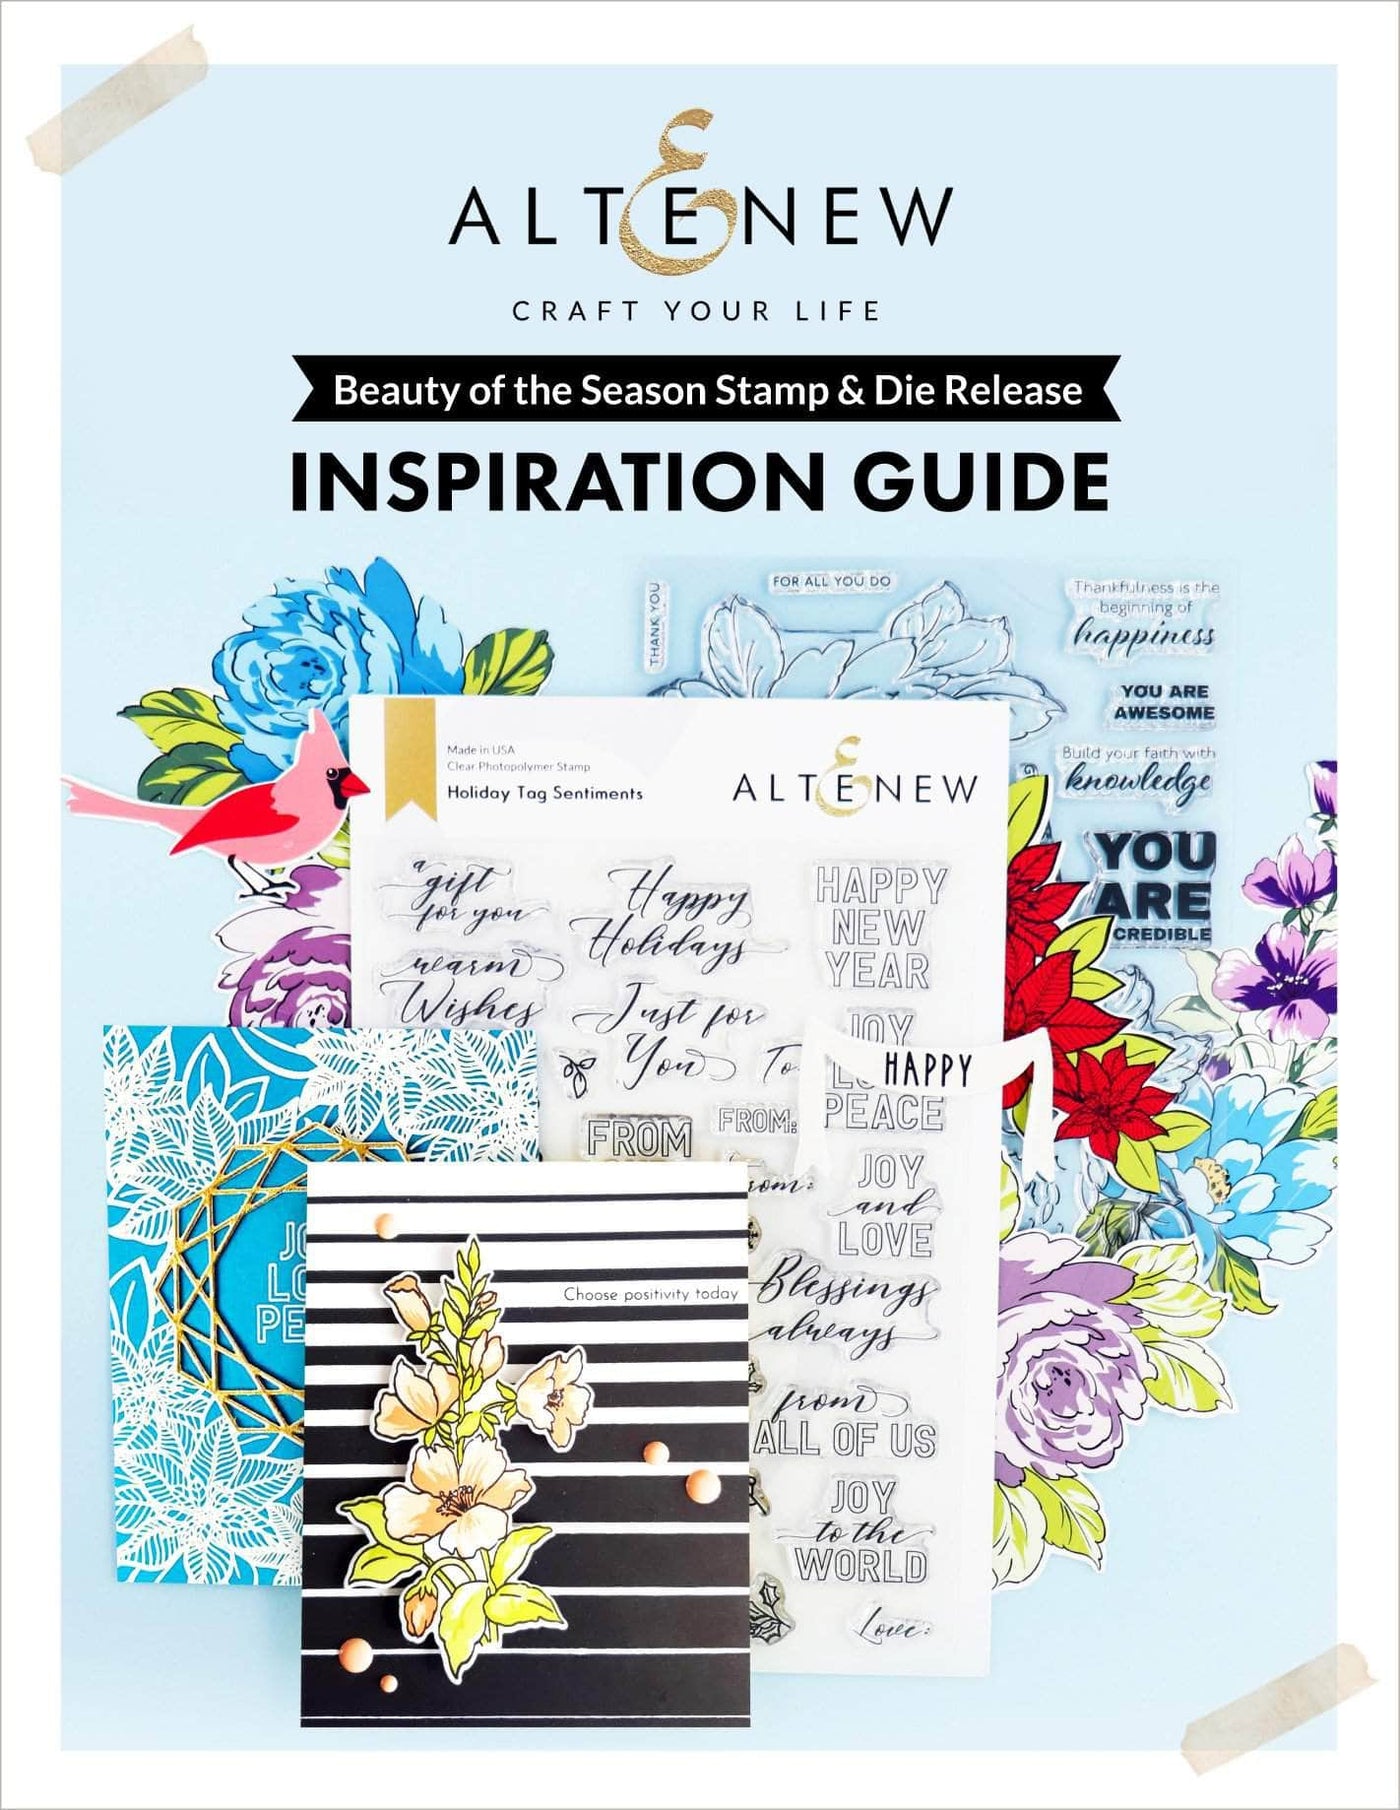 55Printing.com Printed Media Beauty of the Season Stamp & Die Release Inspiration Guide